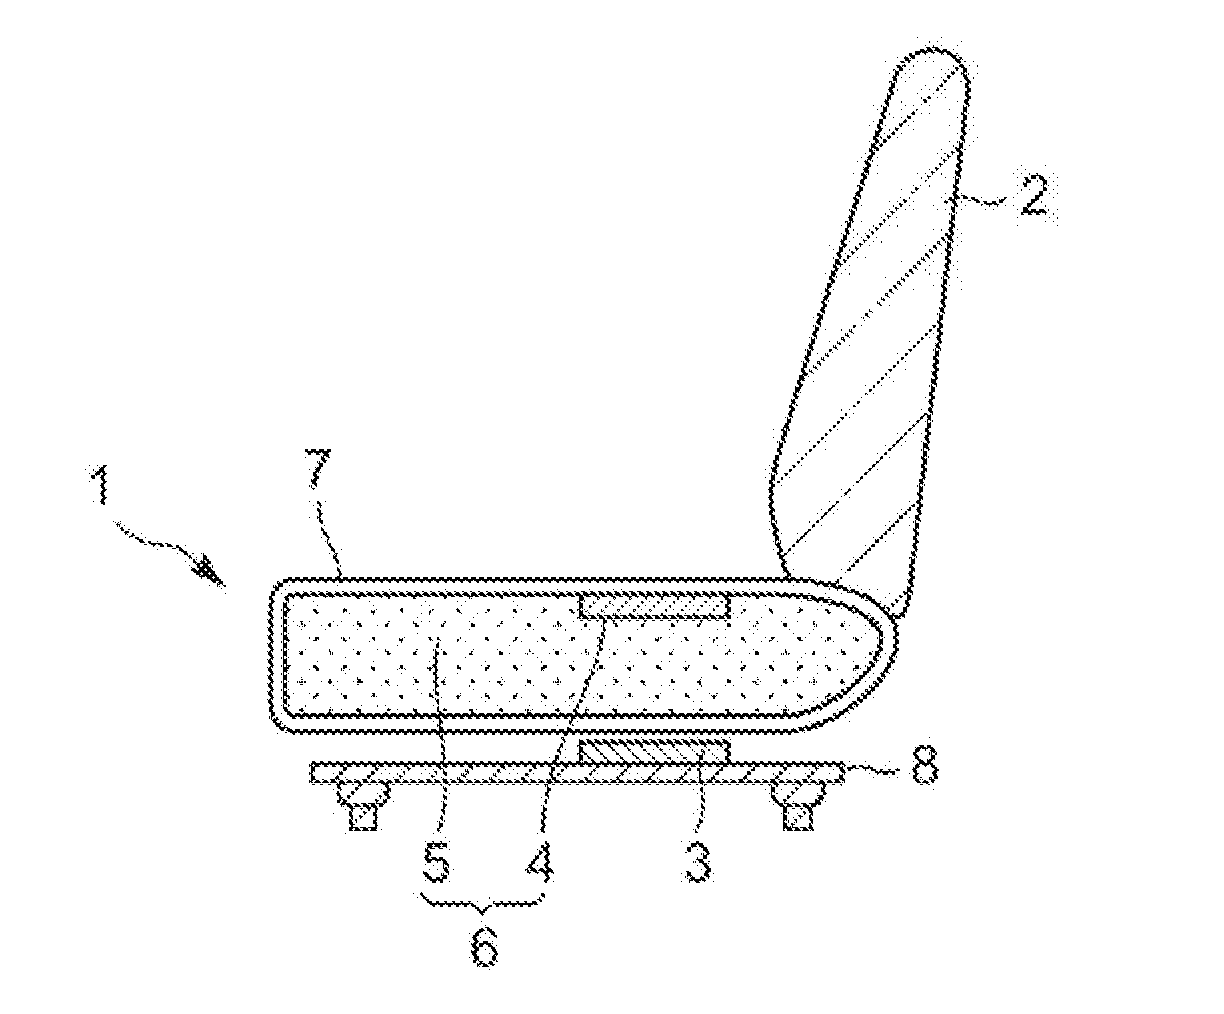 System for detecting deformation of cushion pad and production thereof